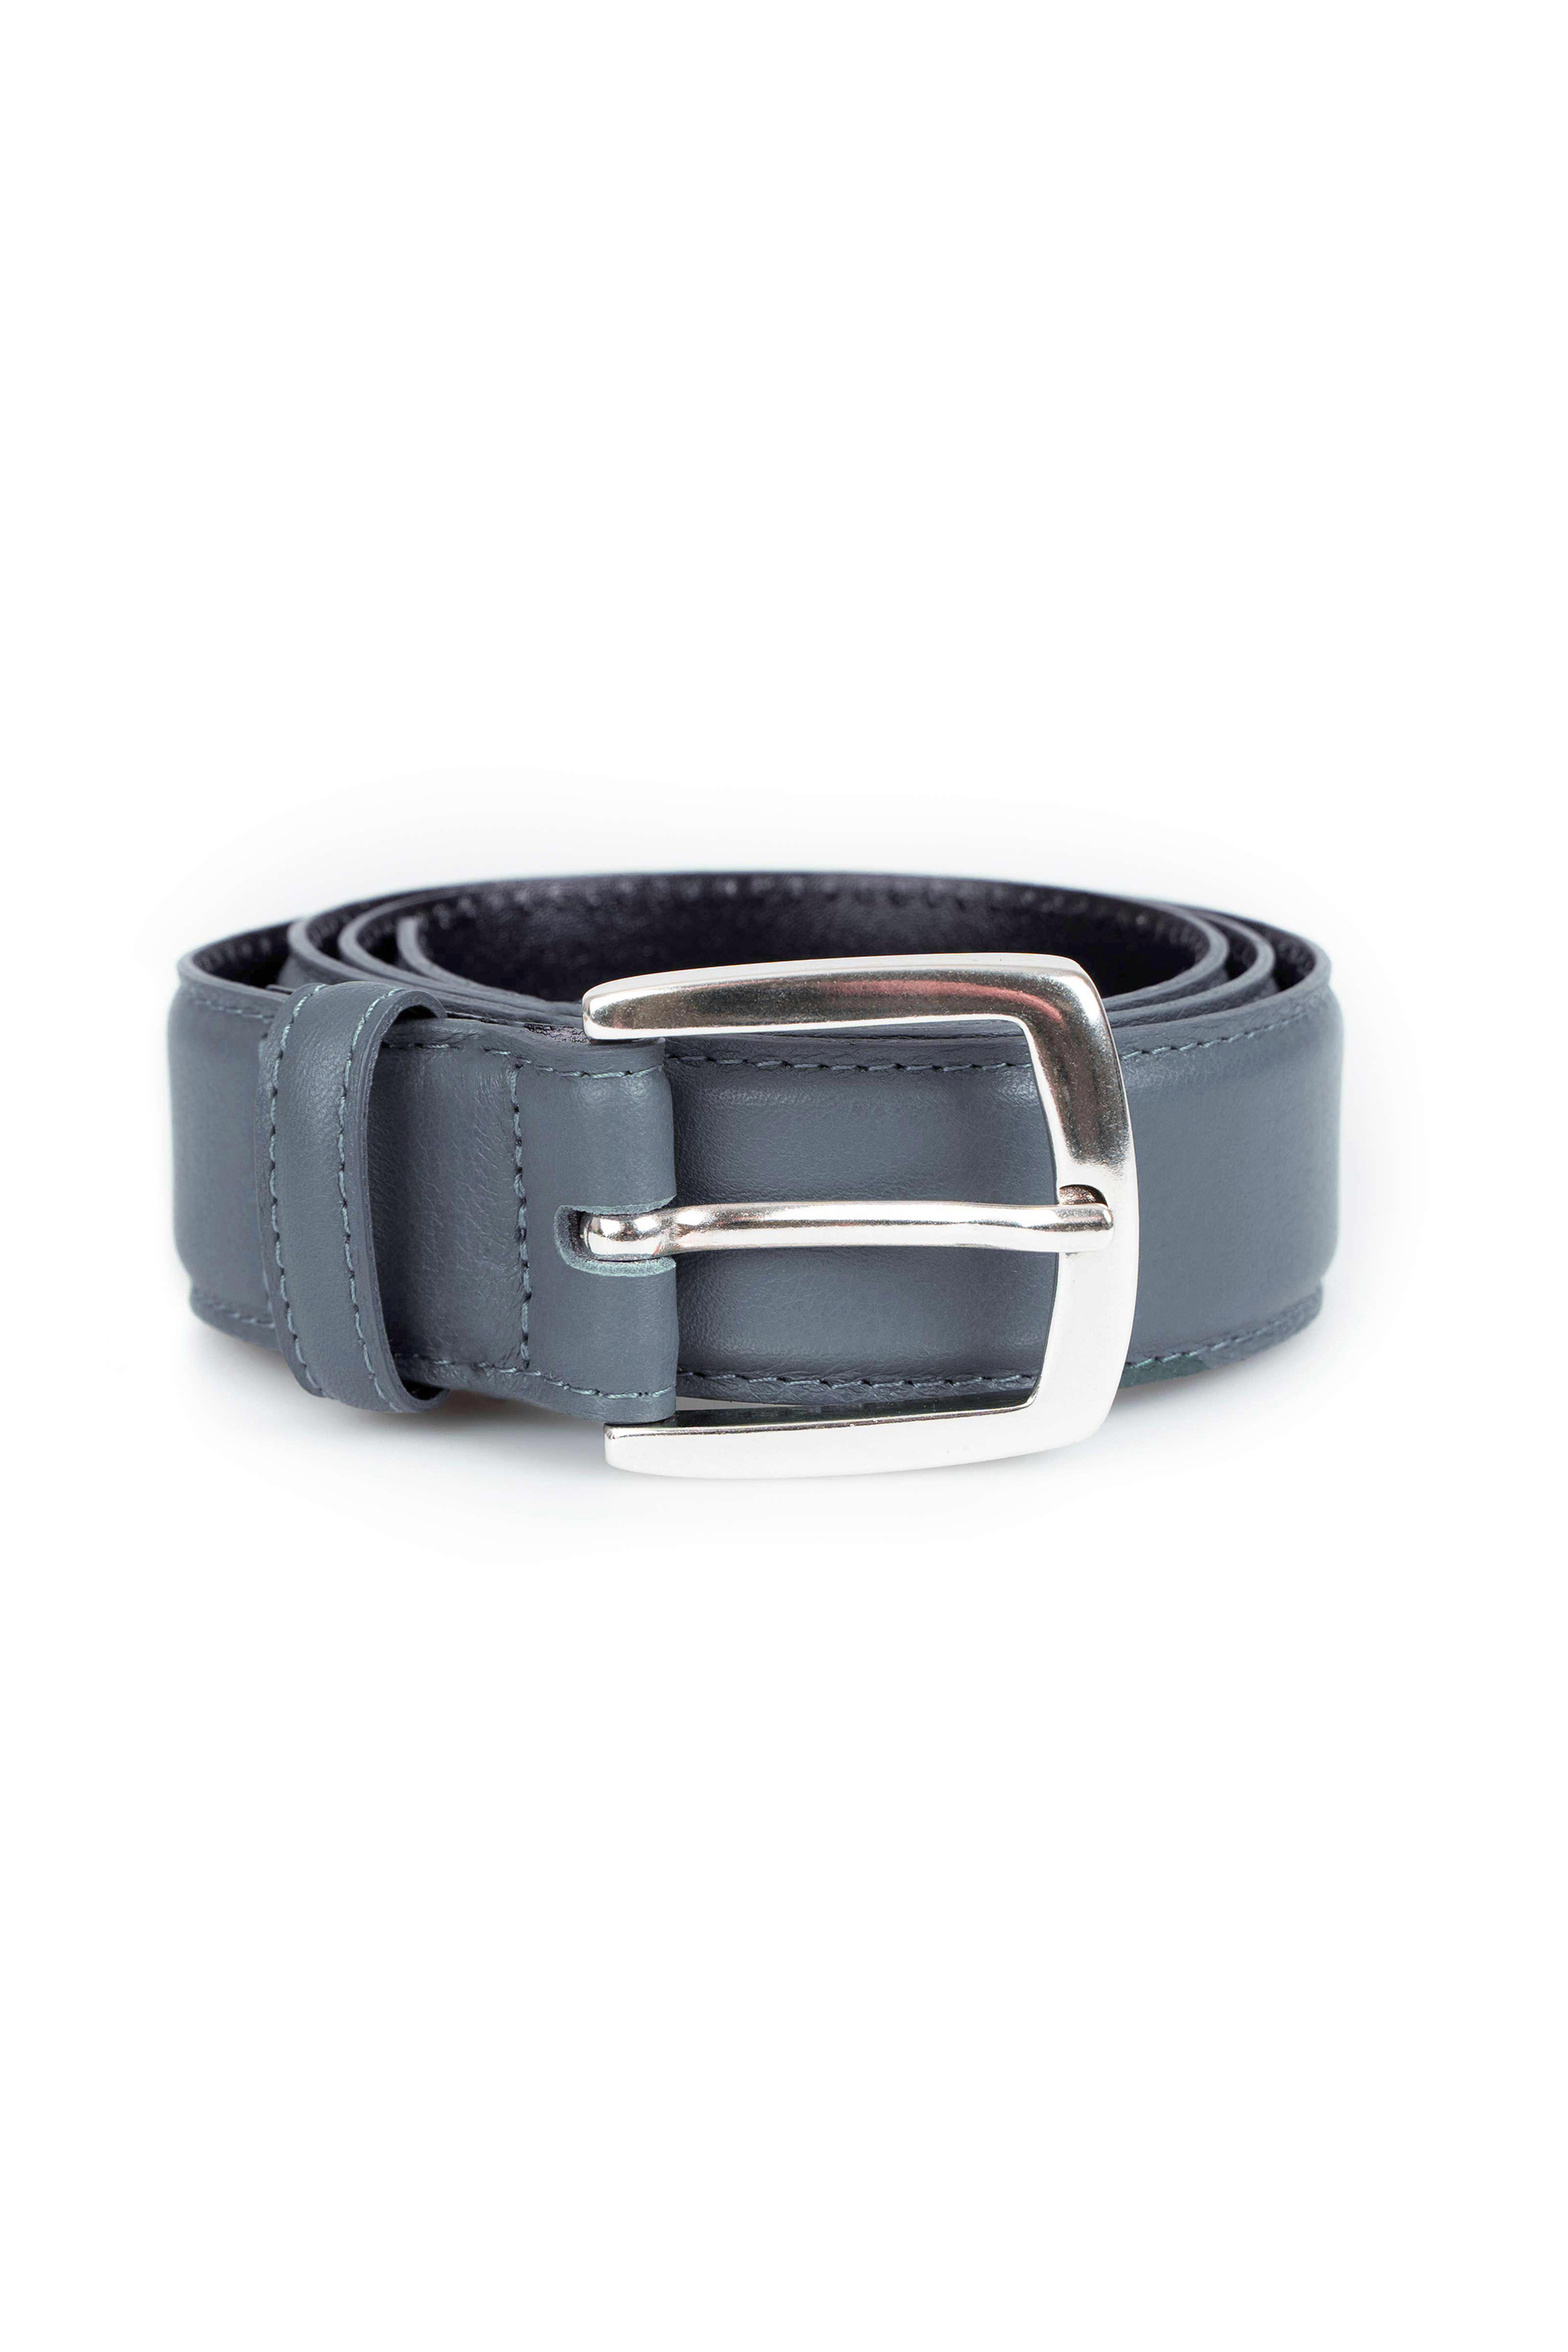 be150_classic-leather-belt_french_grey_edit.jpg